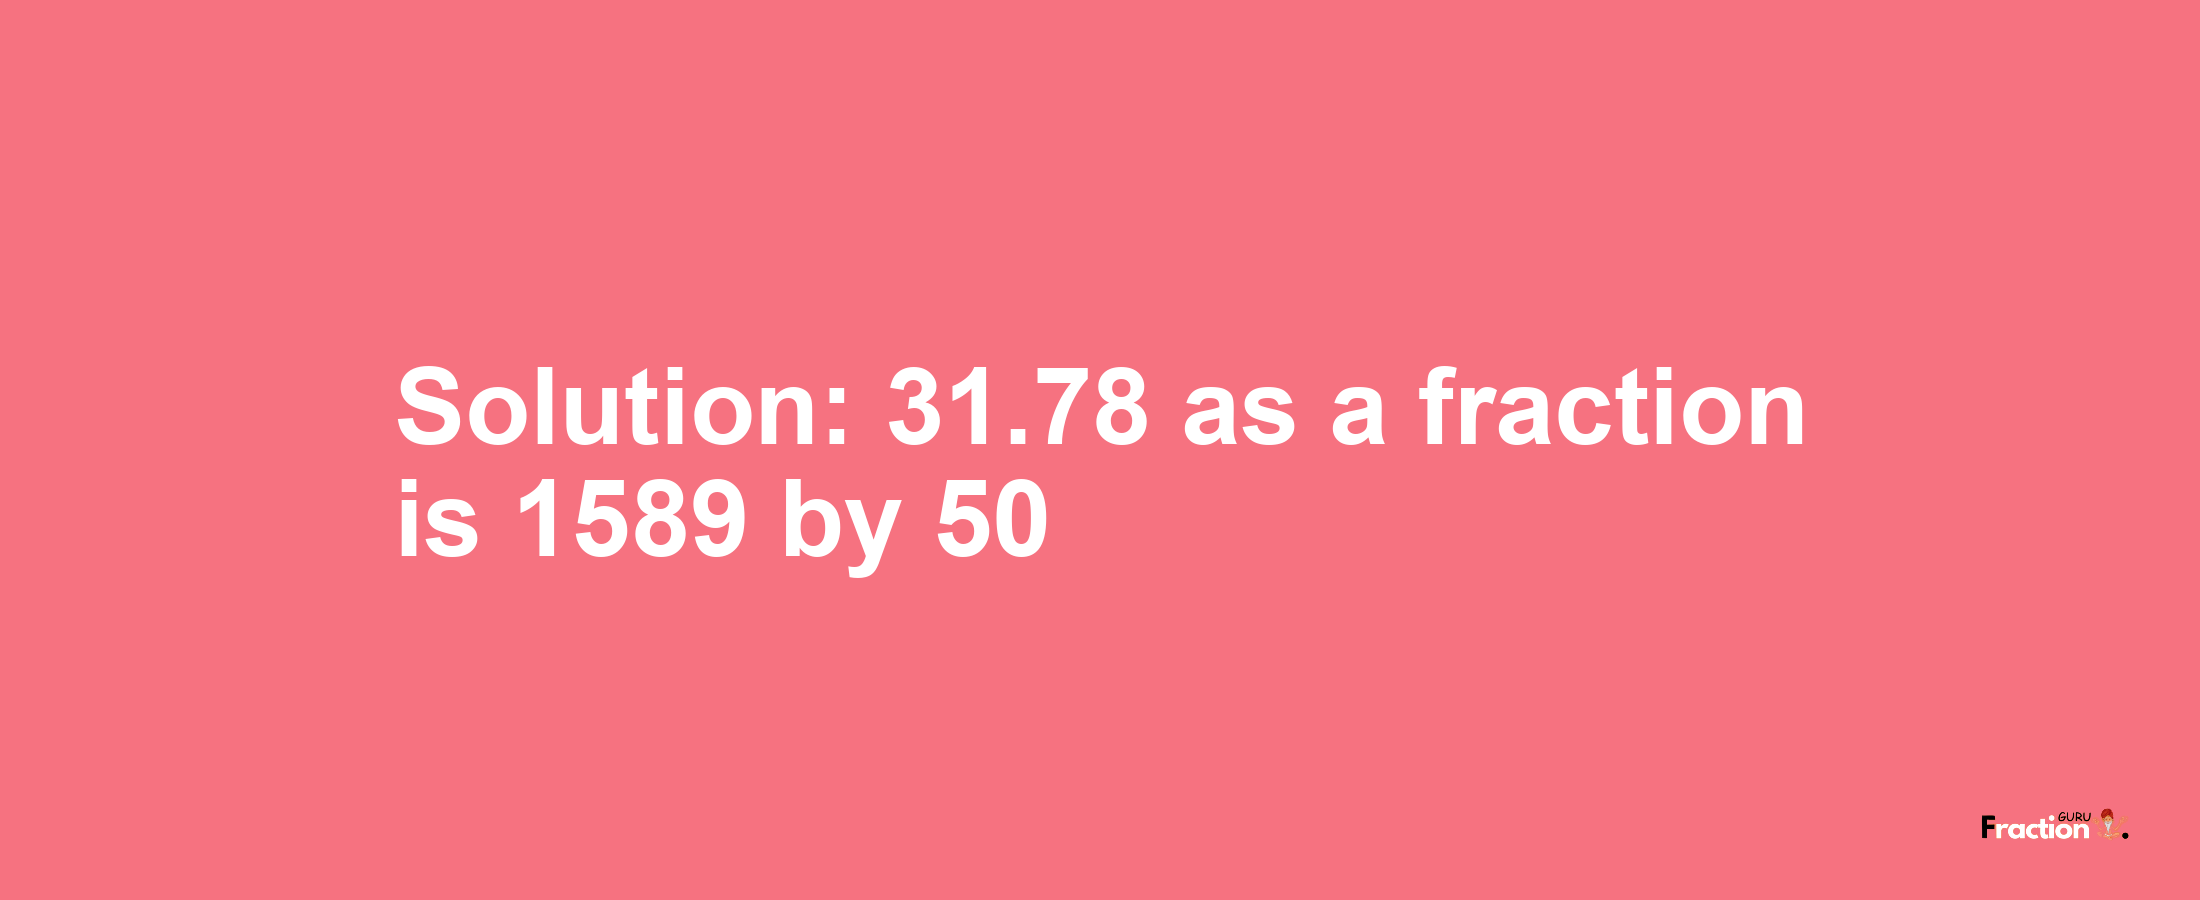 Solution:31.78 as a fraction is 1589/50